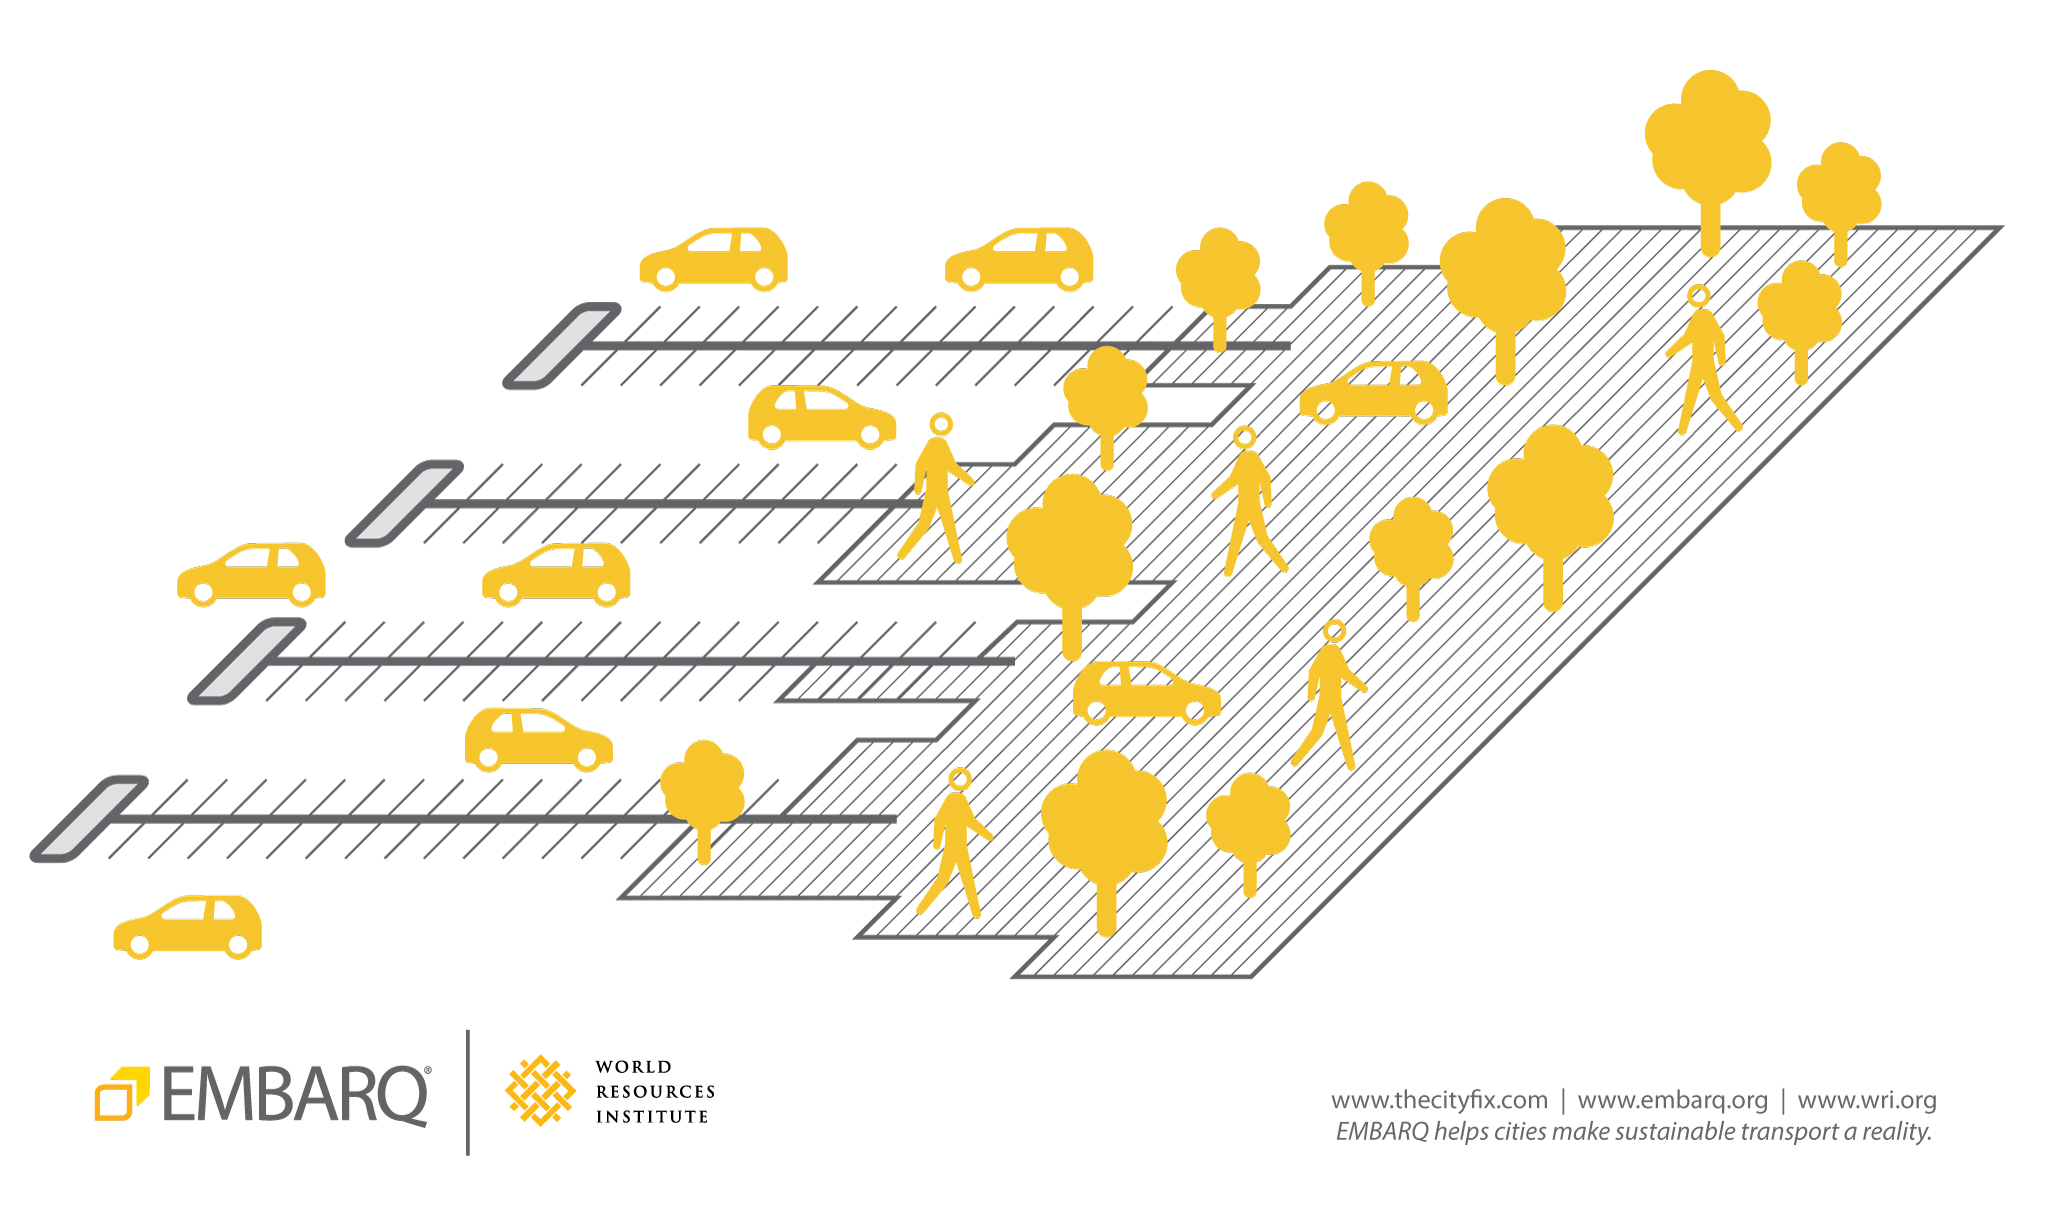 Parking lots can be put to better use through temporary conversion into a productive space, like a public market. The city of San Francisco’s Pavement to Parks Program, for example, retrofits parking spaces into public spaces. Graphic by EMBARQ.